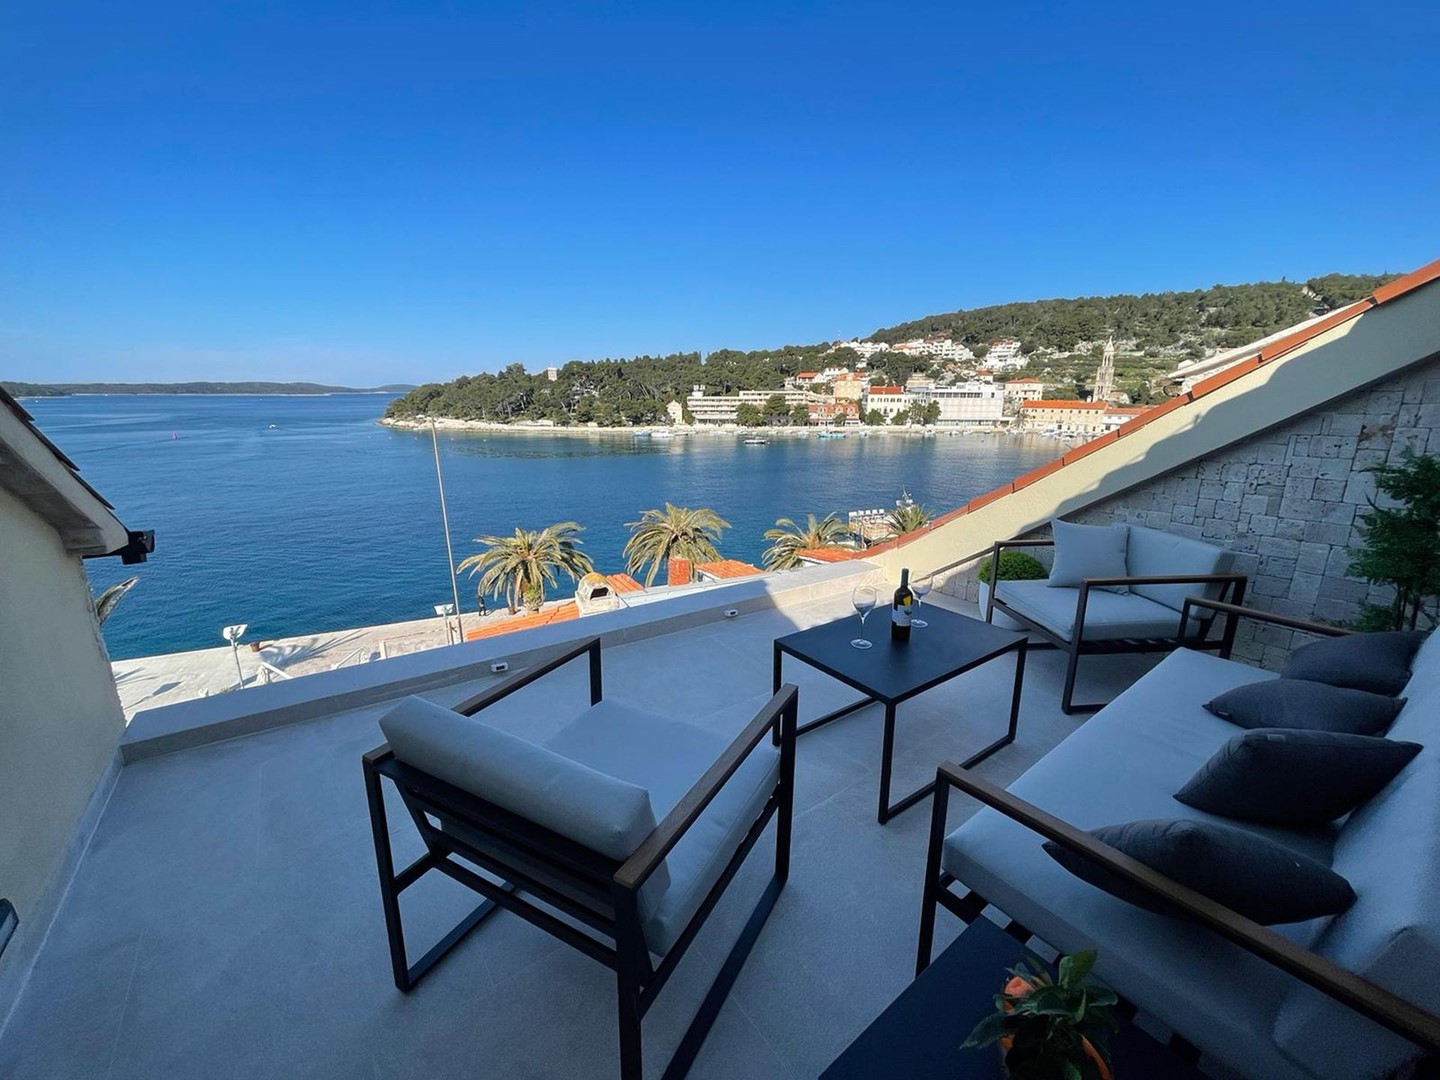 Croatia luxury seafront apartment Gariful Sky for vacation and rent with friends and family